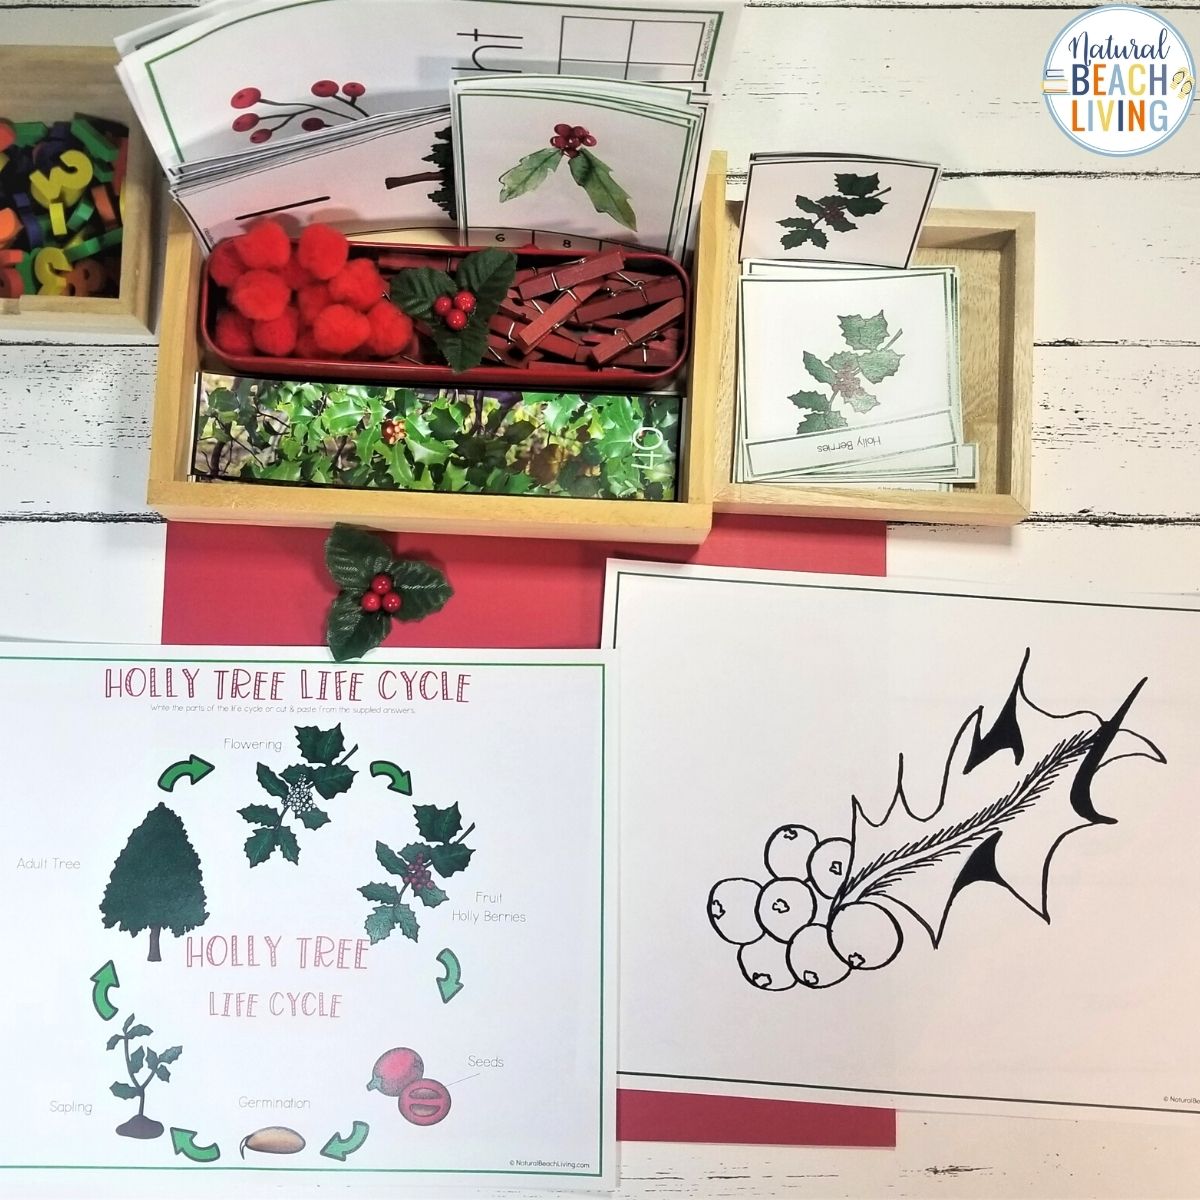 Holly Tree Theme Unit for 3-9 year olds. This is an amazing winter theme full of learning opportunities. You'll get Montessori 3 part cards, Holly Coloring Pages, Holly Tree Handwriting Pages, Winter Poetry and Writing Prompts, Holly Tree Life Cycle with Control Chart, Holly Tree Sequencing Cards, and Tons of early math skills activities, Holly Tree Preschool Theme